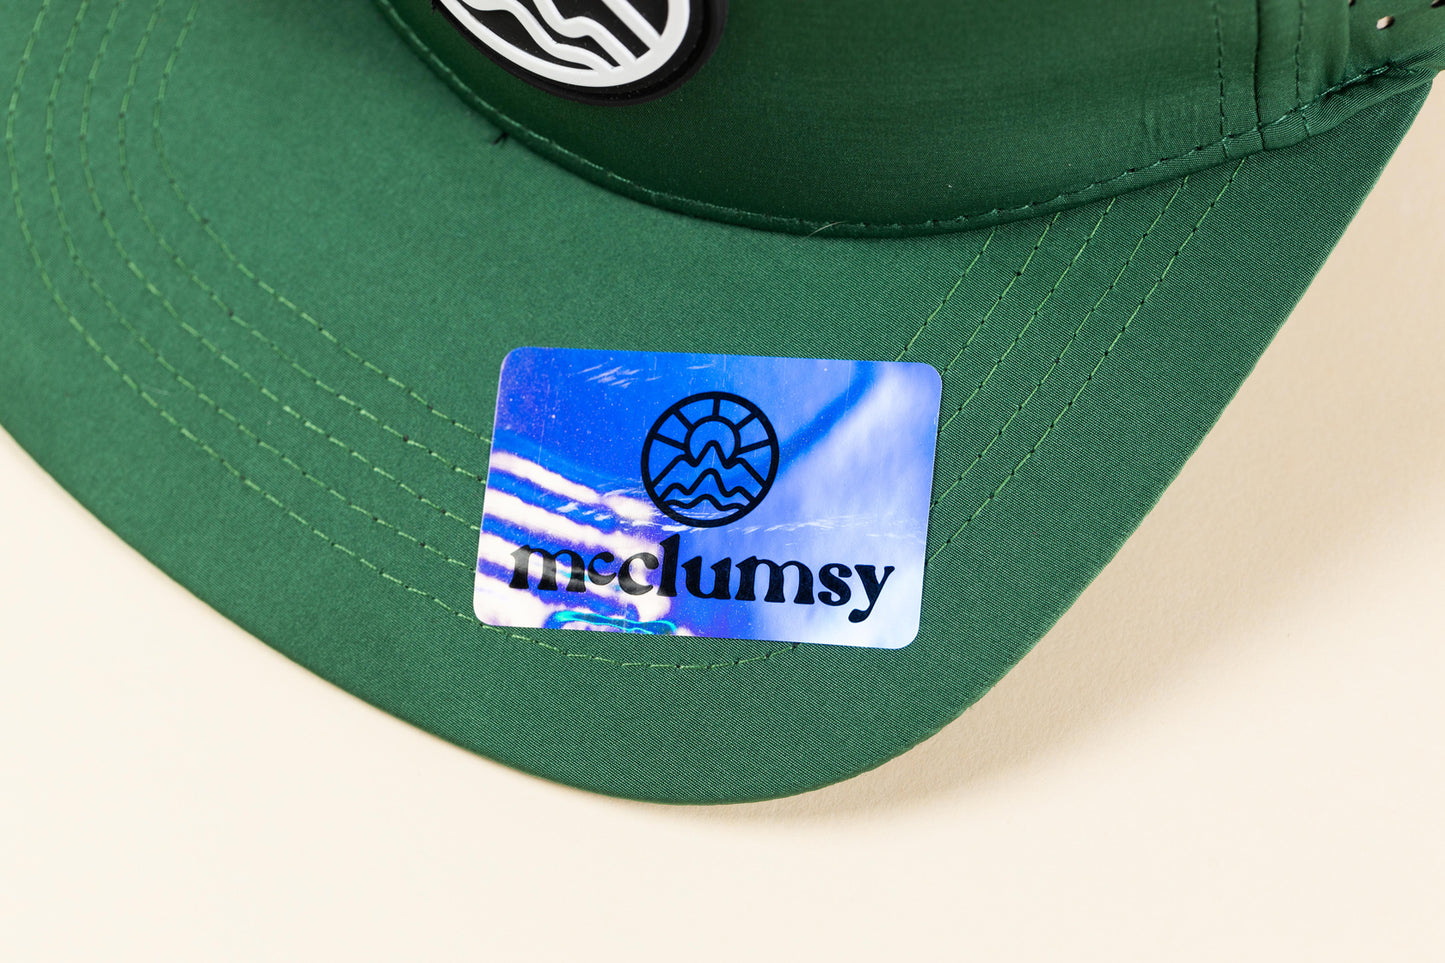 McClumsy sticker on the bill of the 7 panel McClumsy Trucker Hat